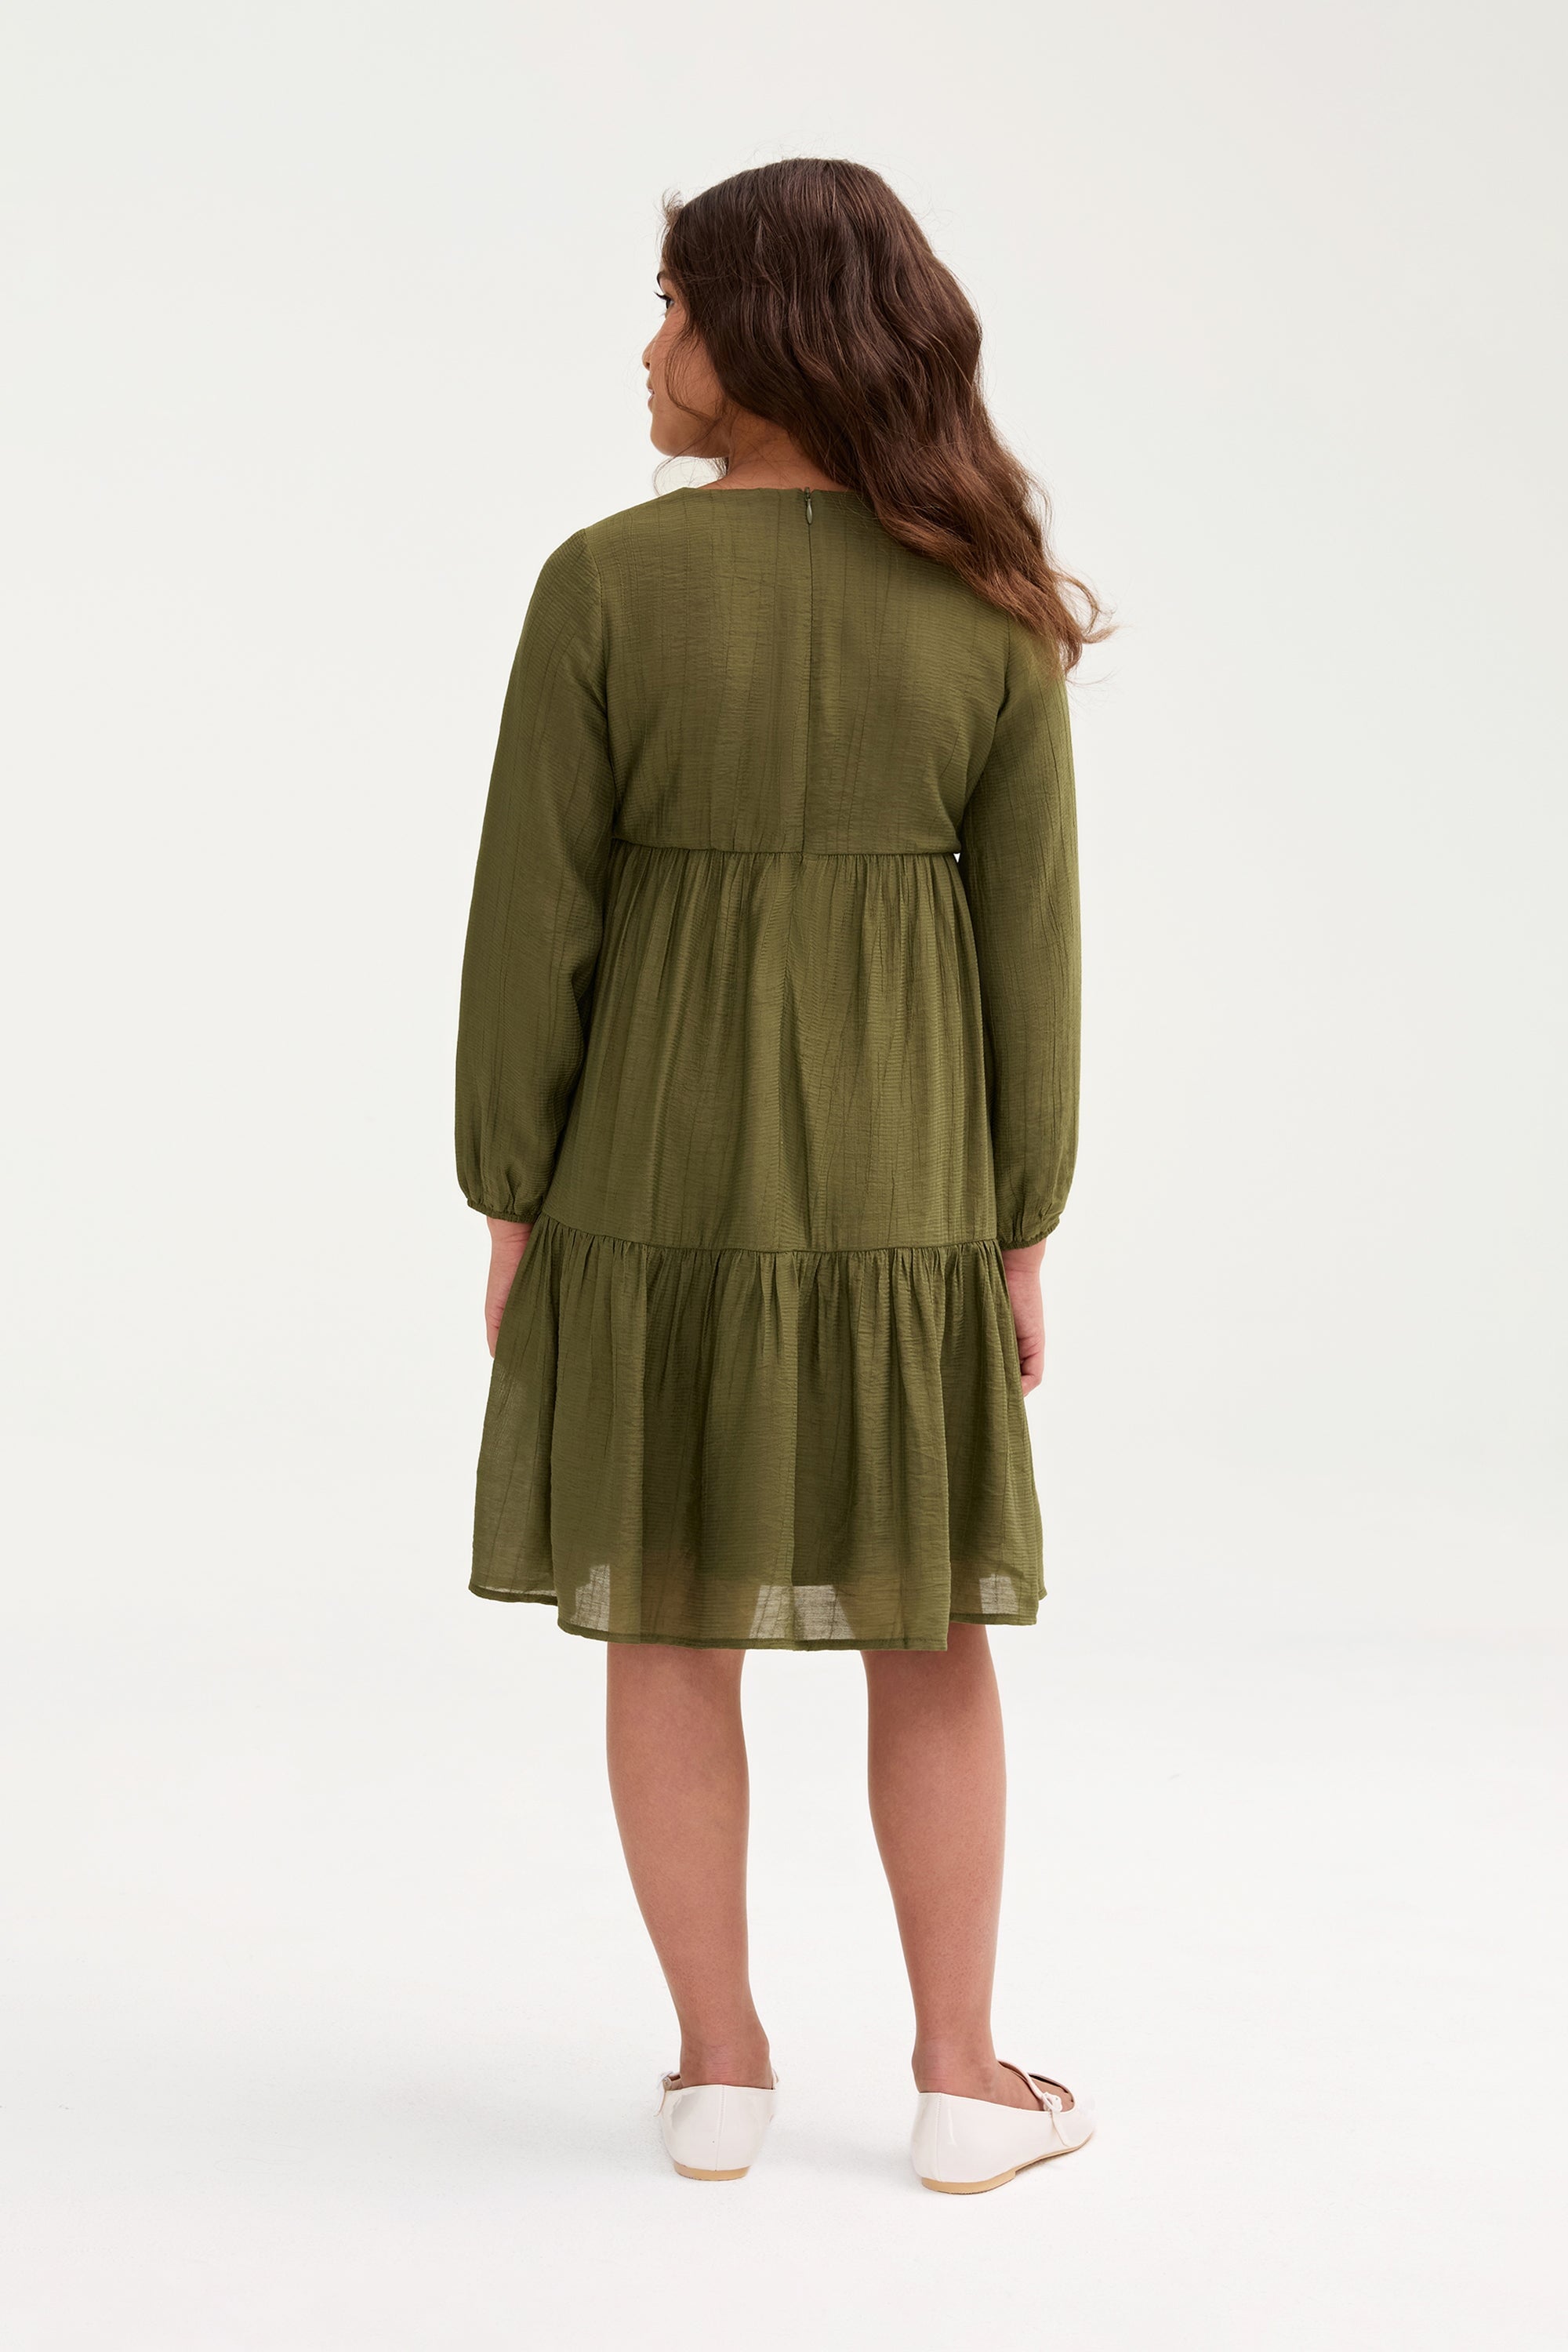 Mila Tiered Dress - Olive Green (Girls) Clothing Veiled 